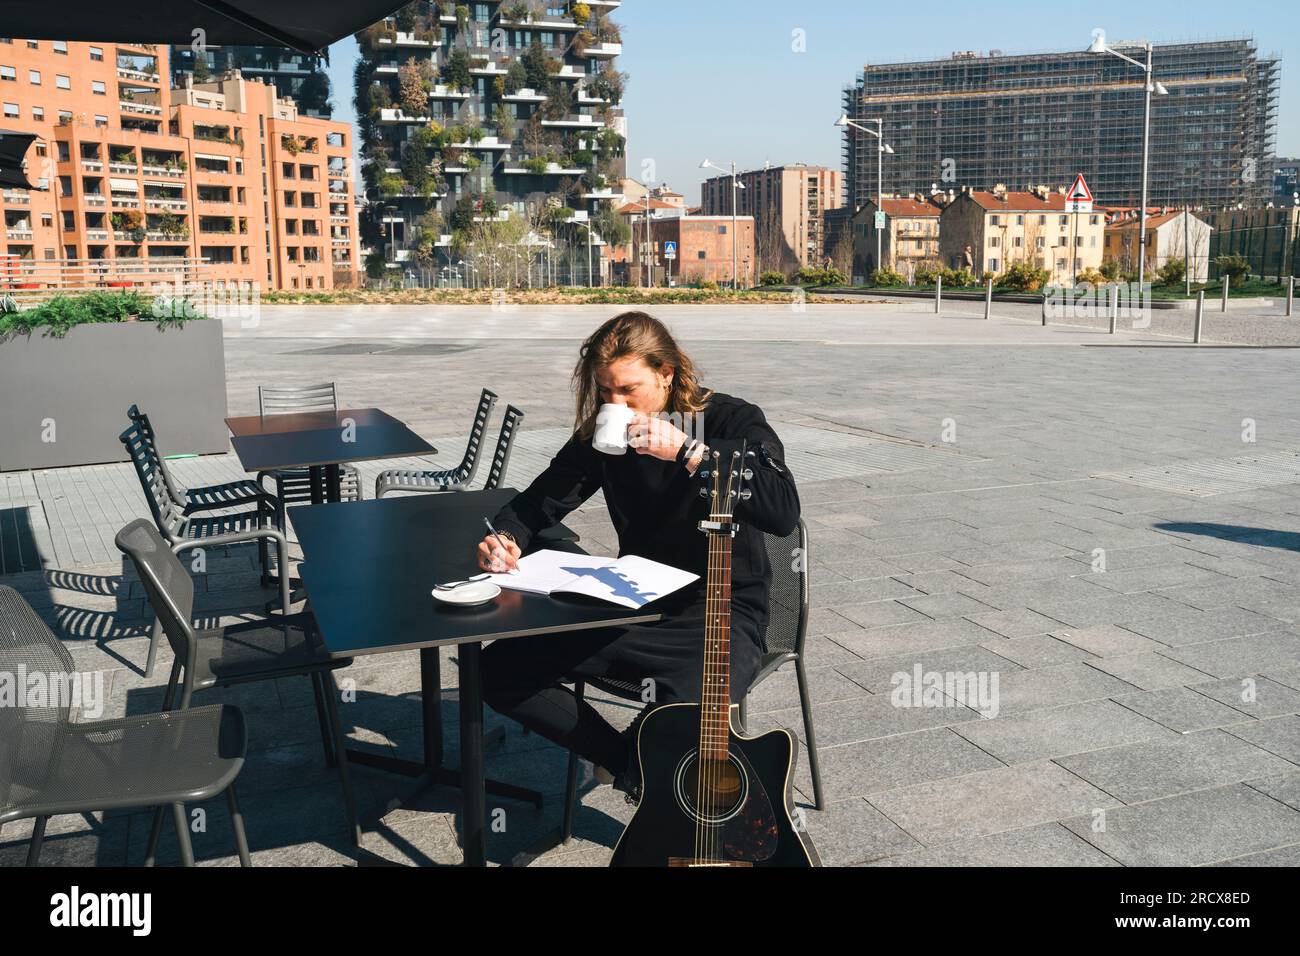 man taking a break drinking coffee in a sunny day Stock Photo